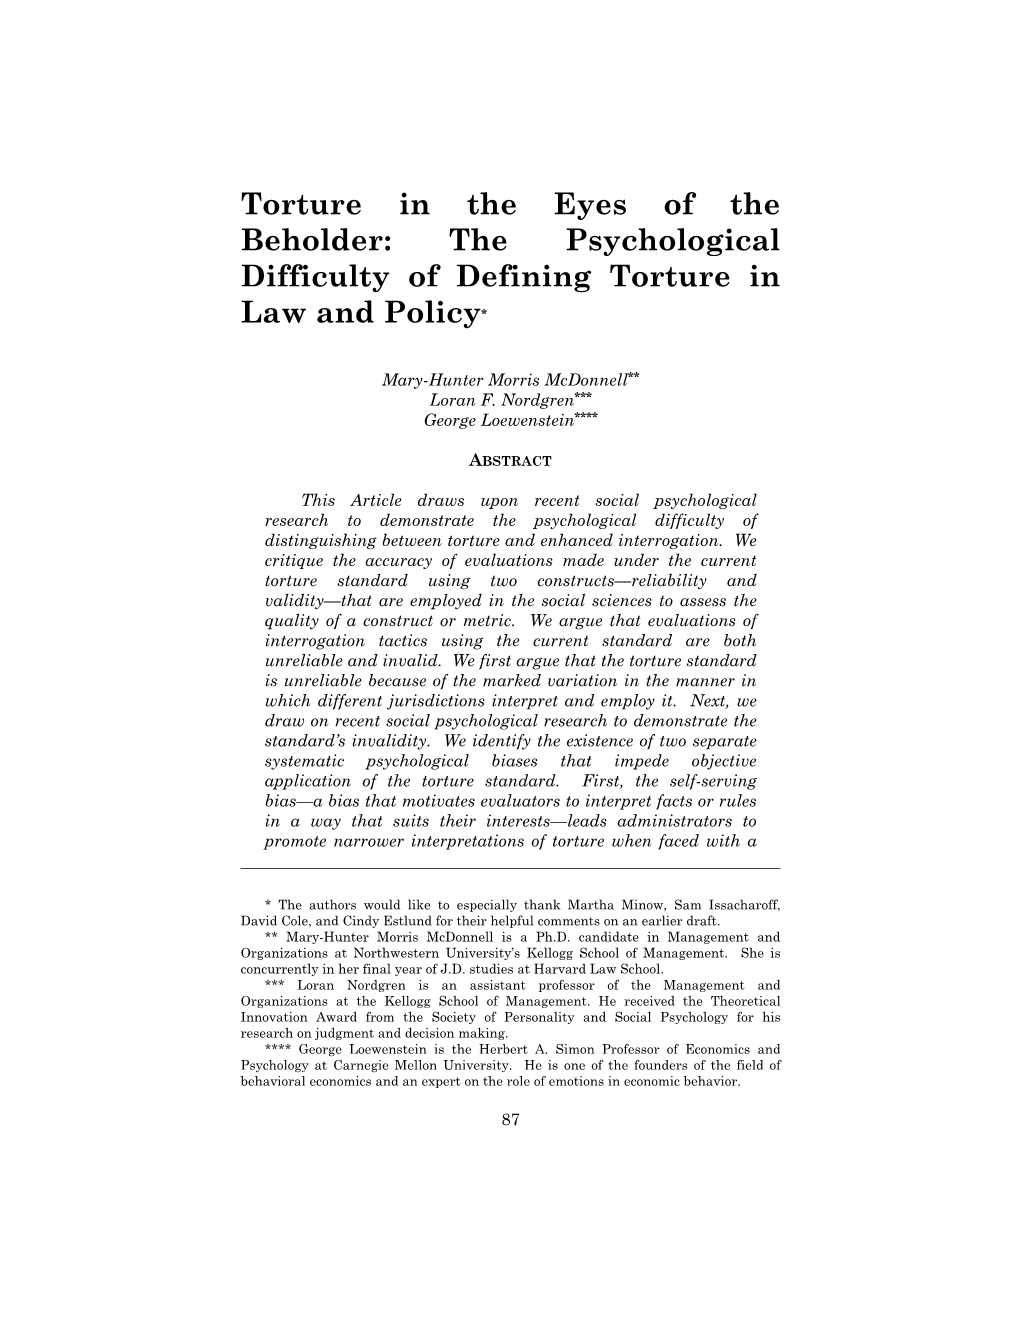 Torture in the Eyes of the Beholder: the Psychological Difficulty of Defining Torture in Law and Policy*